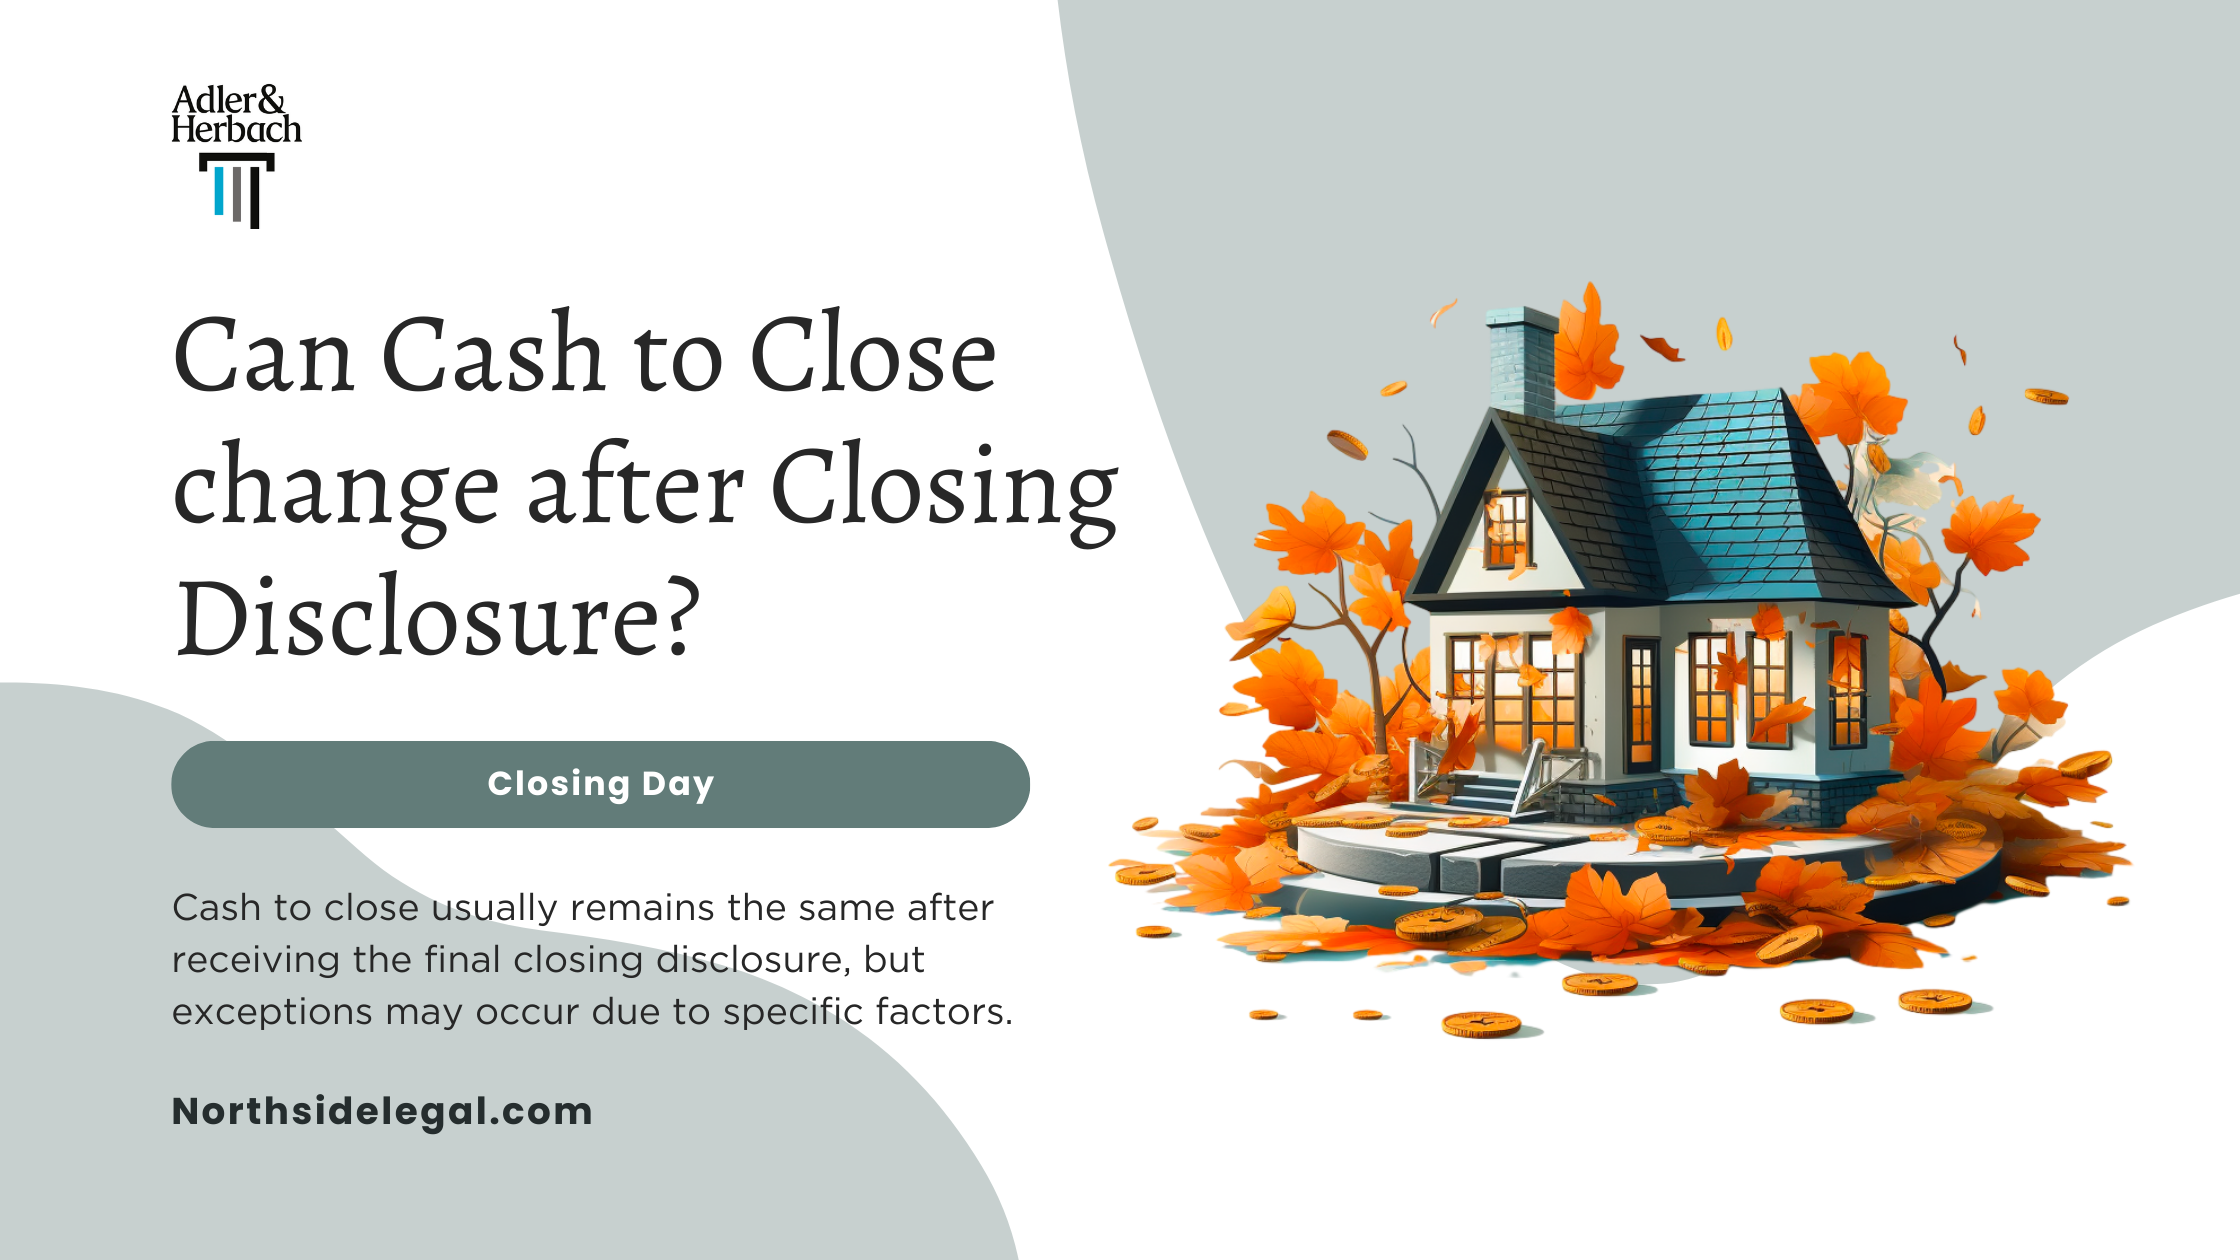 Can Cash to Close Change After the Closing Disclosure?